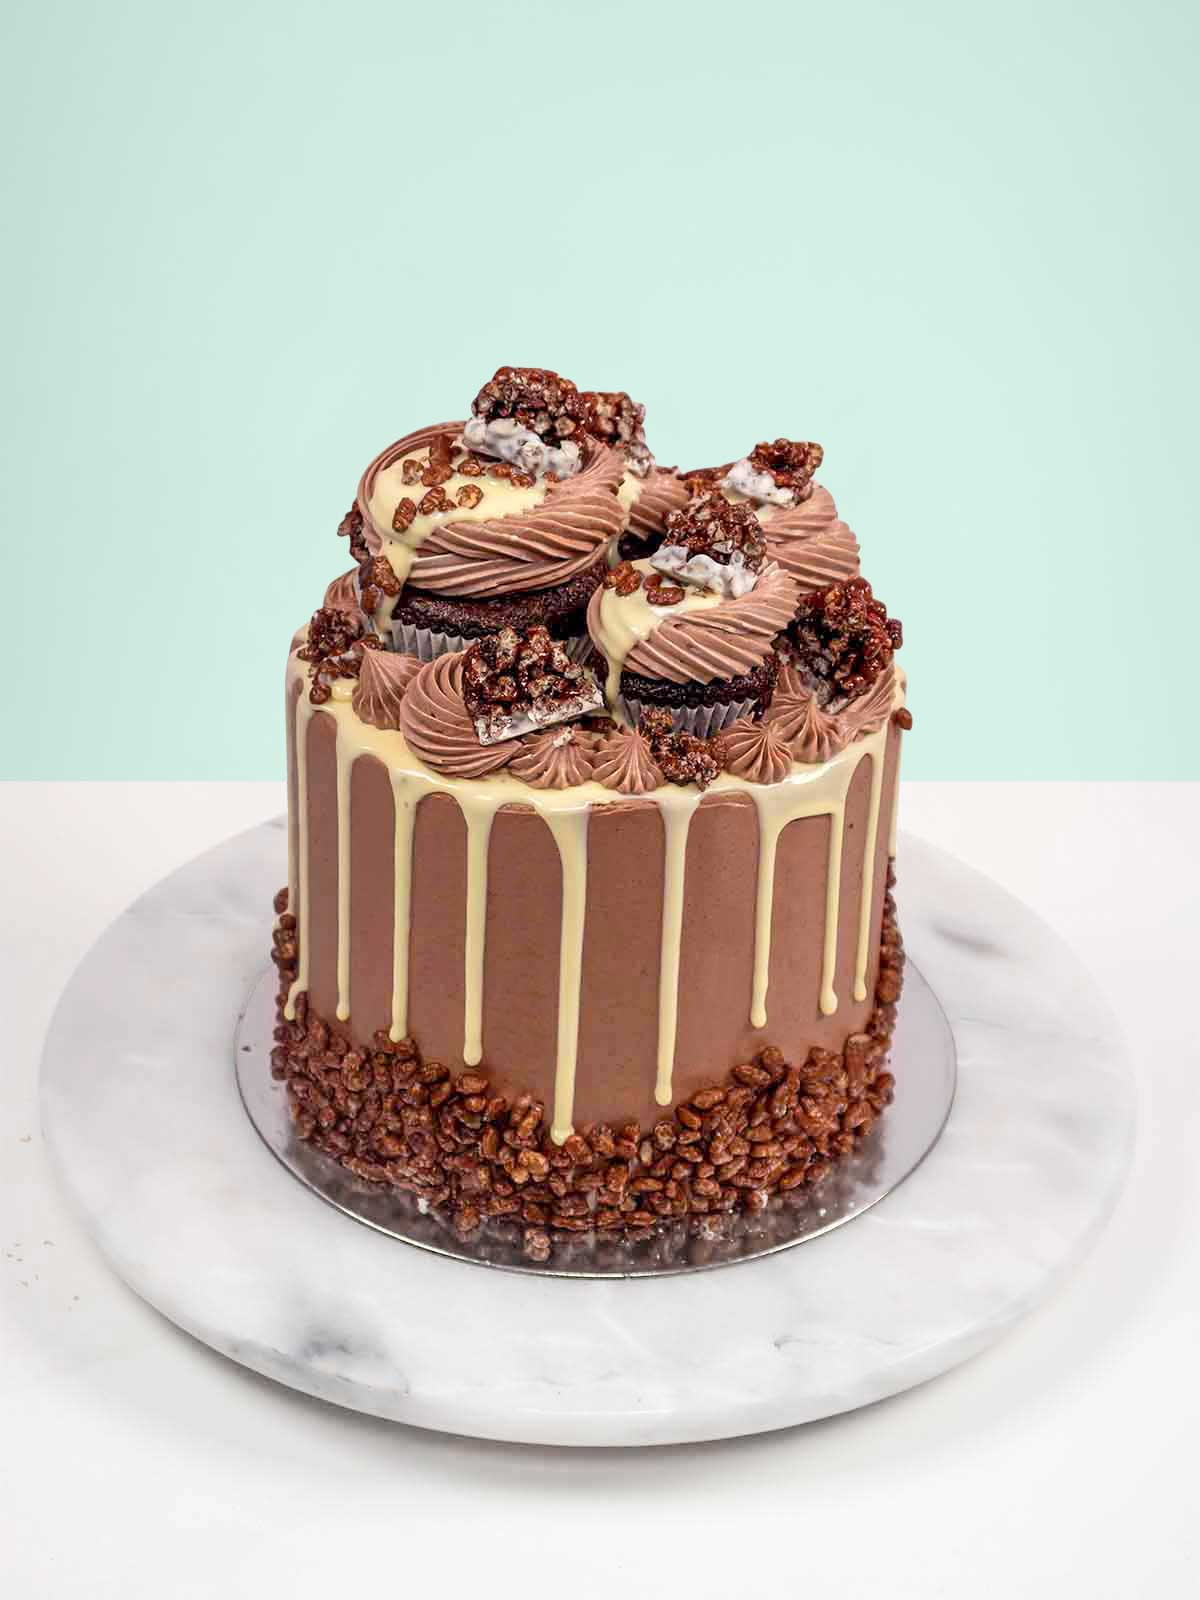 Coco Pops Cereal Cake to Buy